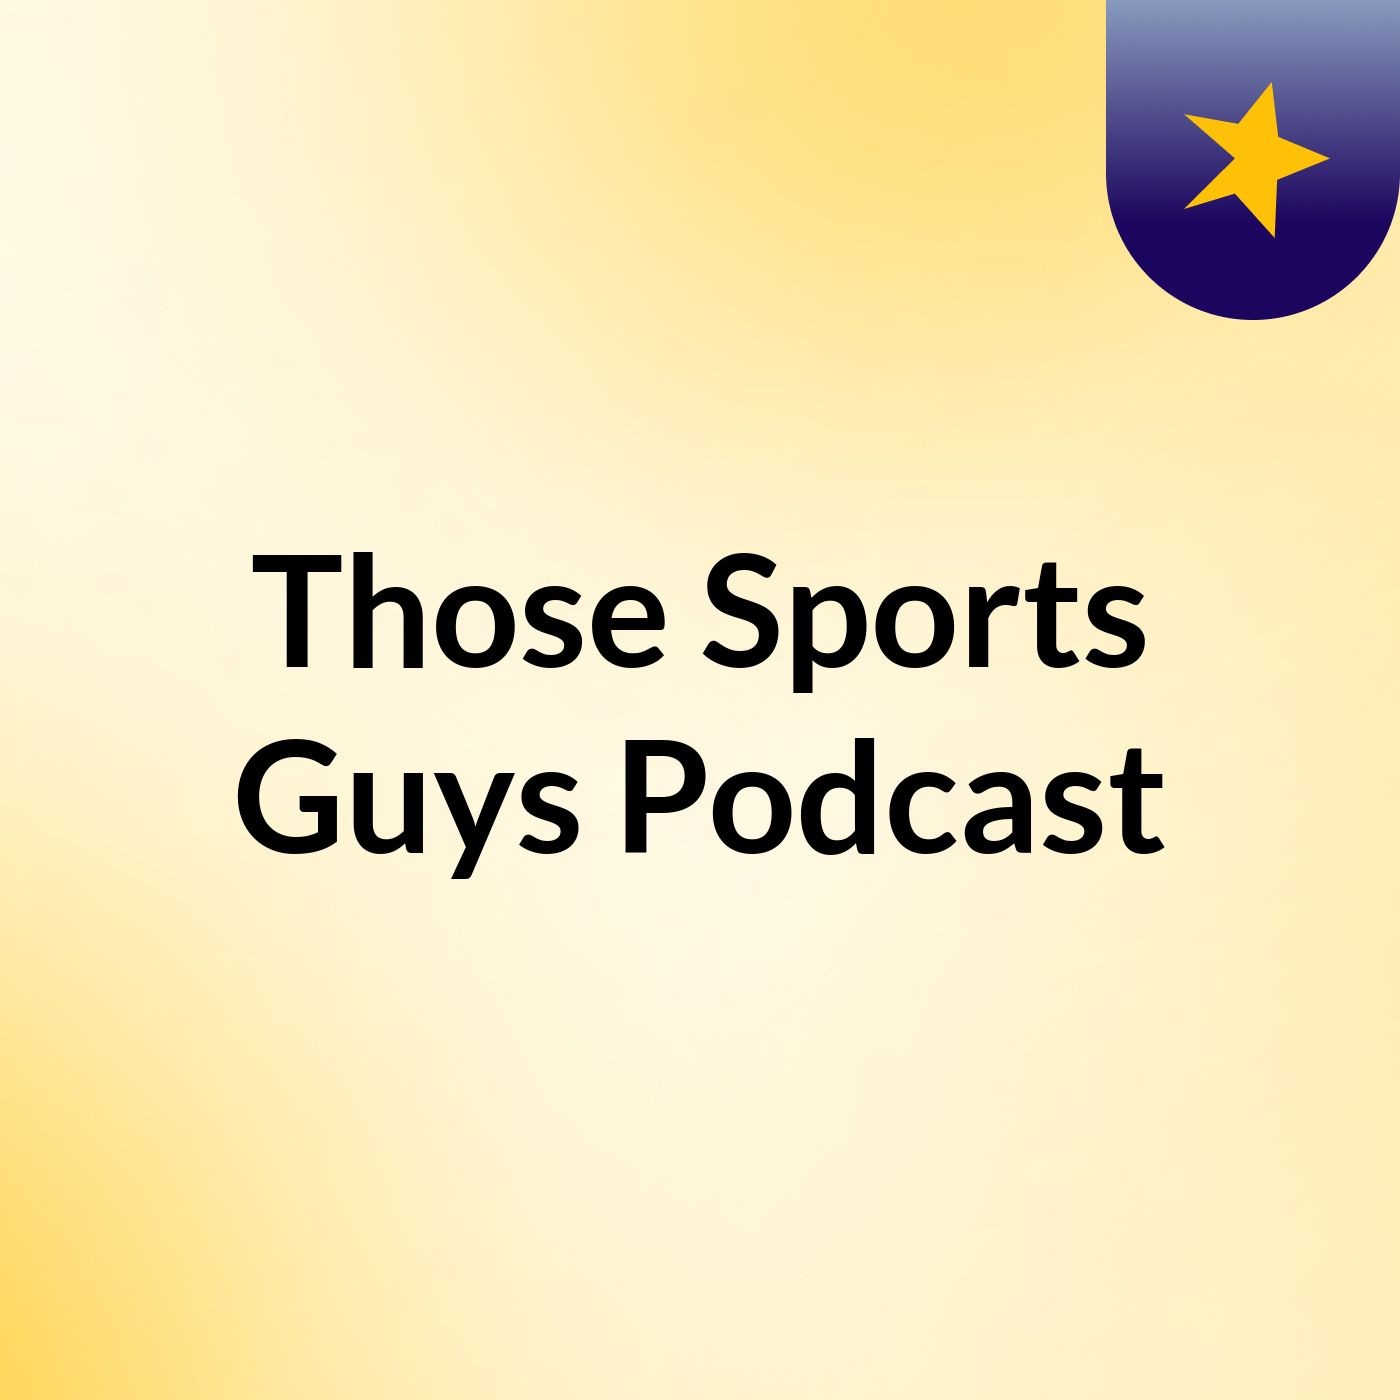 Those Sports Guys Podcast #6: 7/26